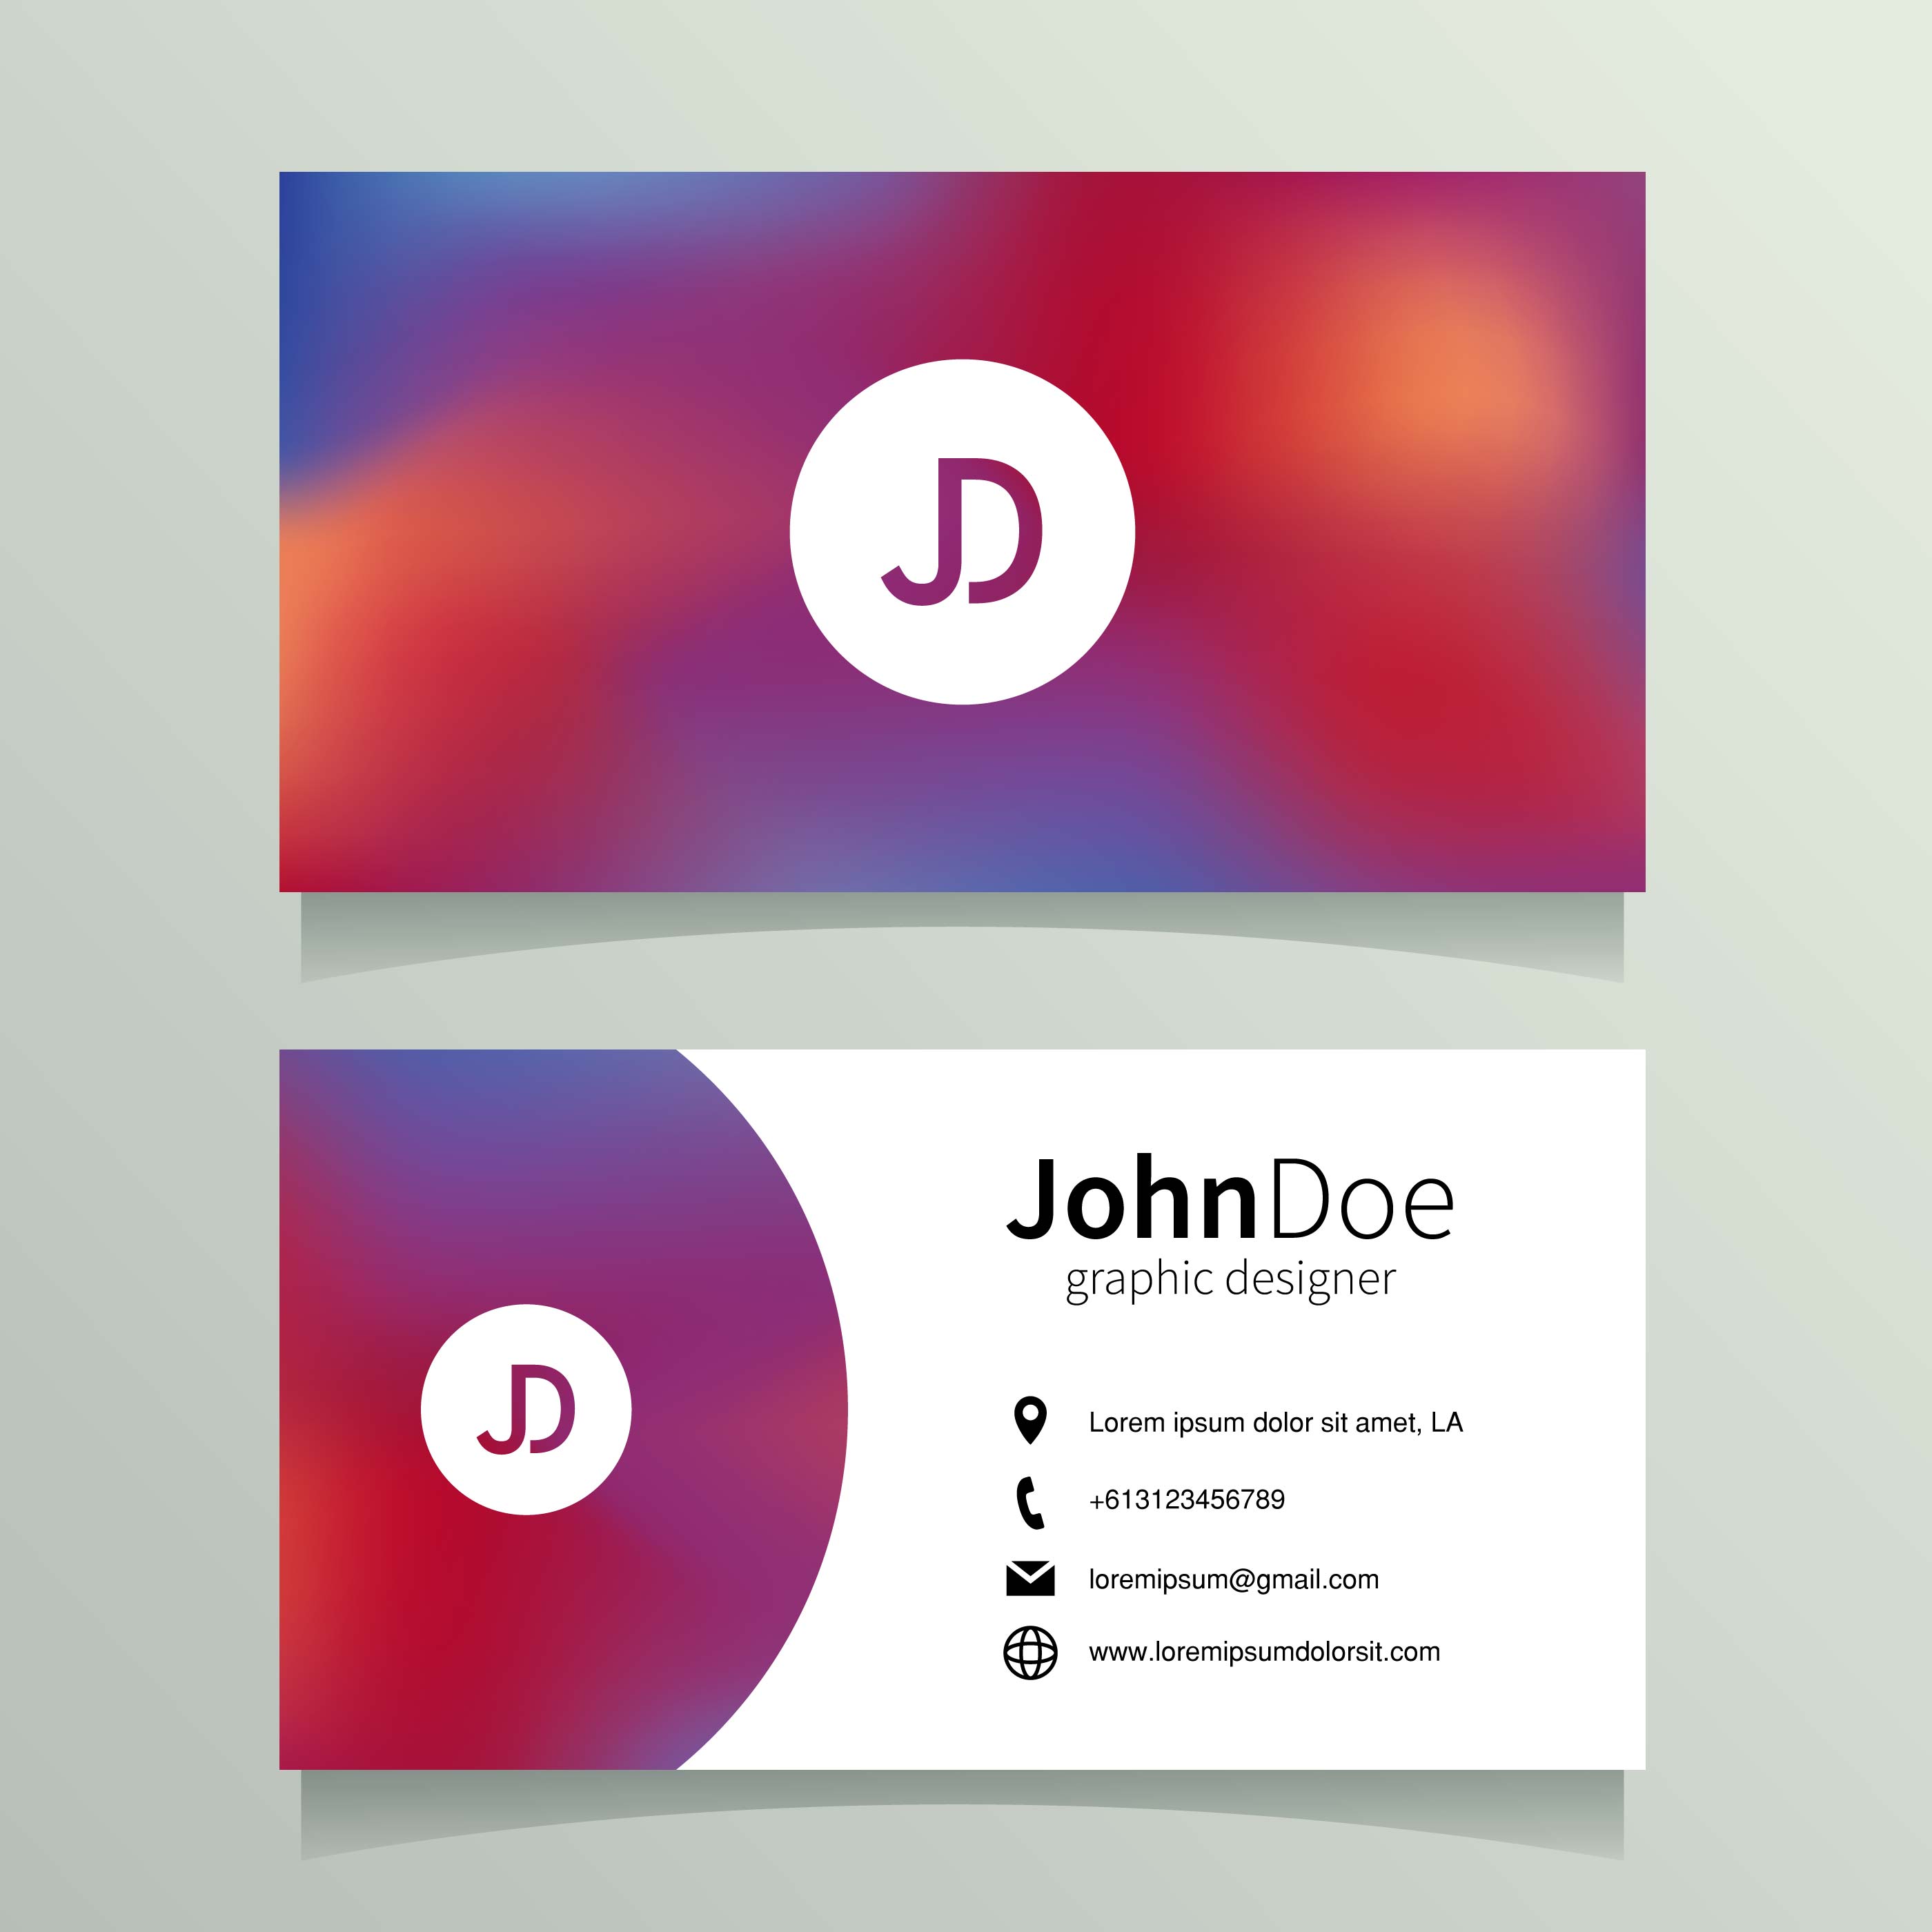 Graphic Designer Name Card Template - Download Free ...